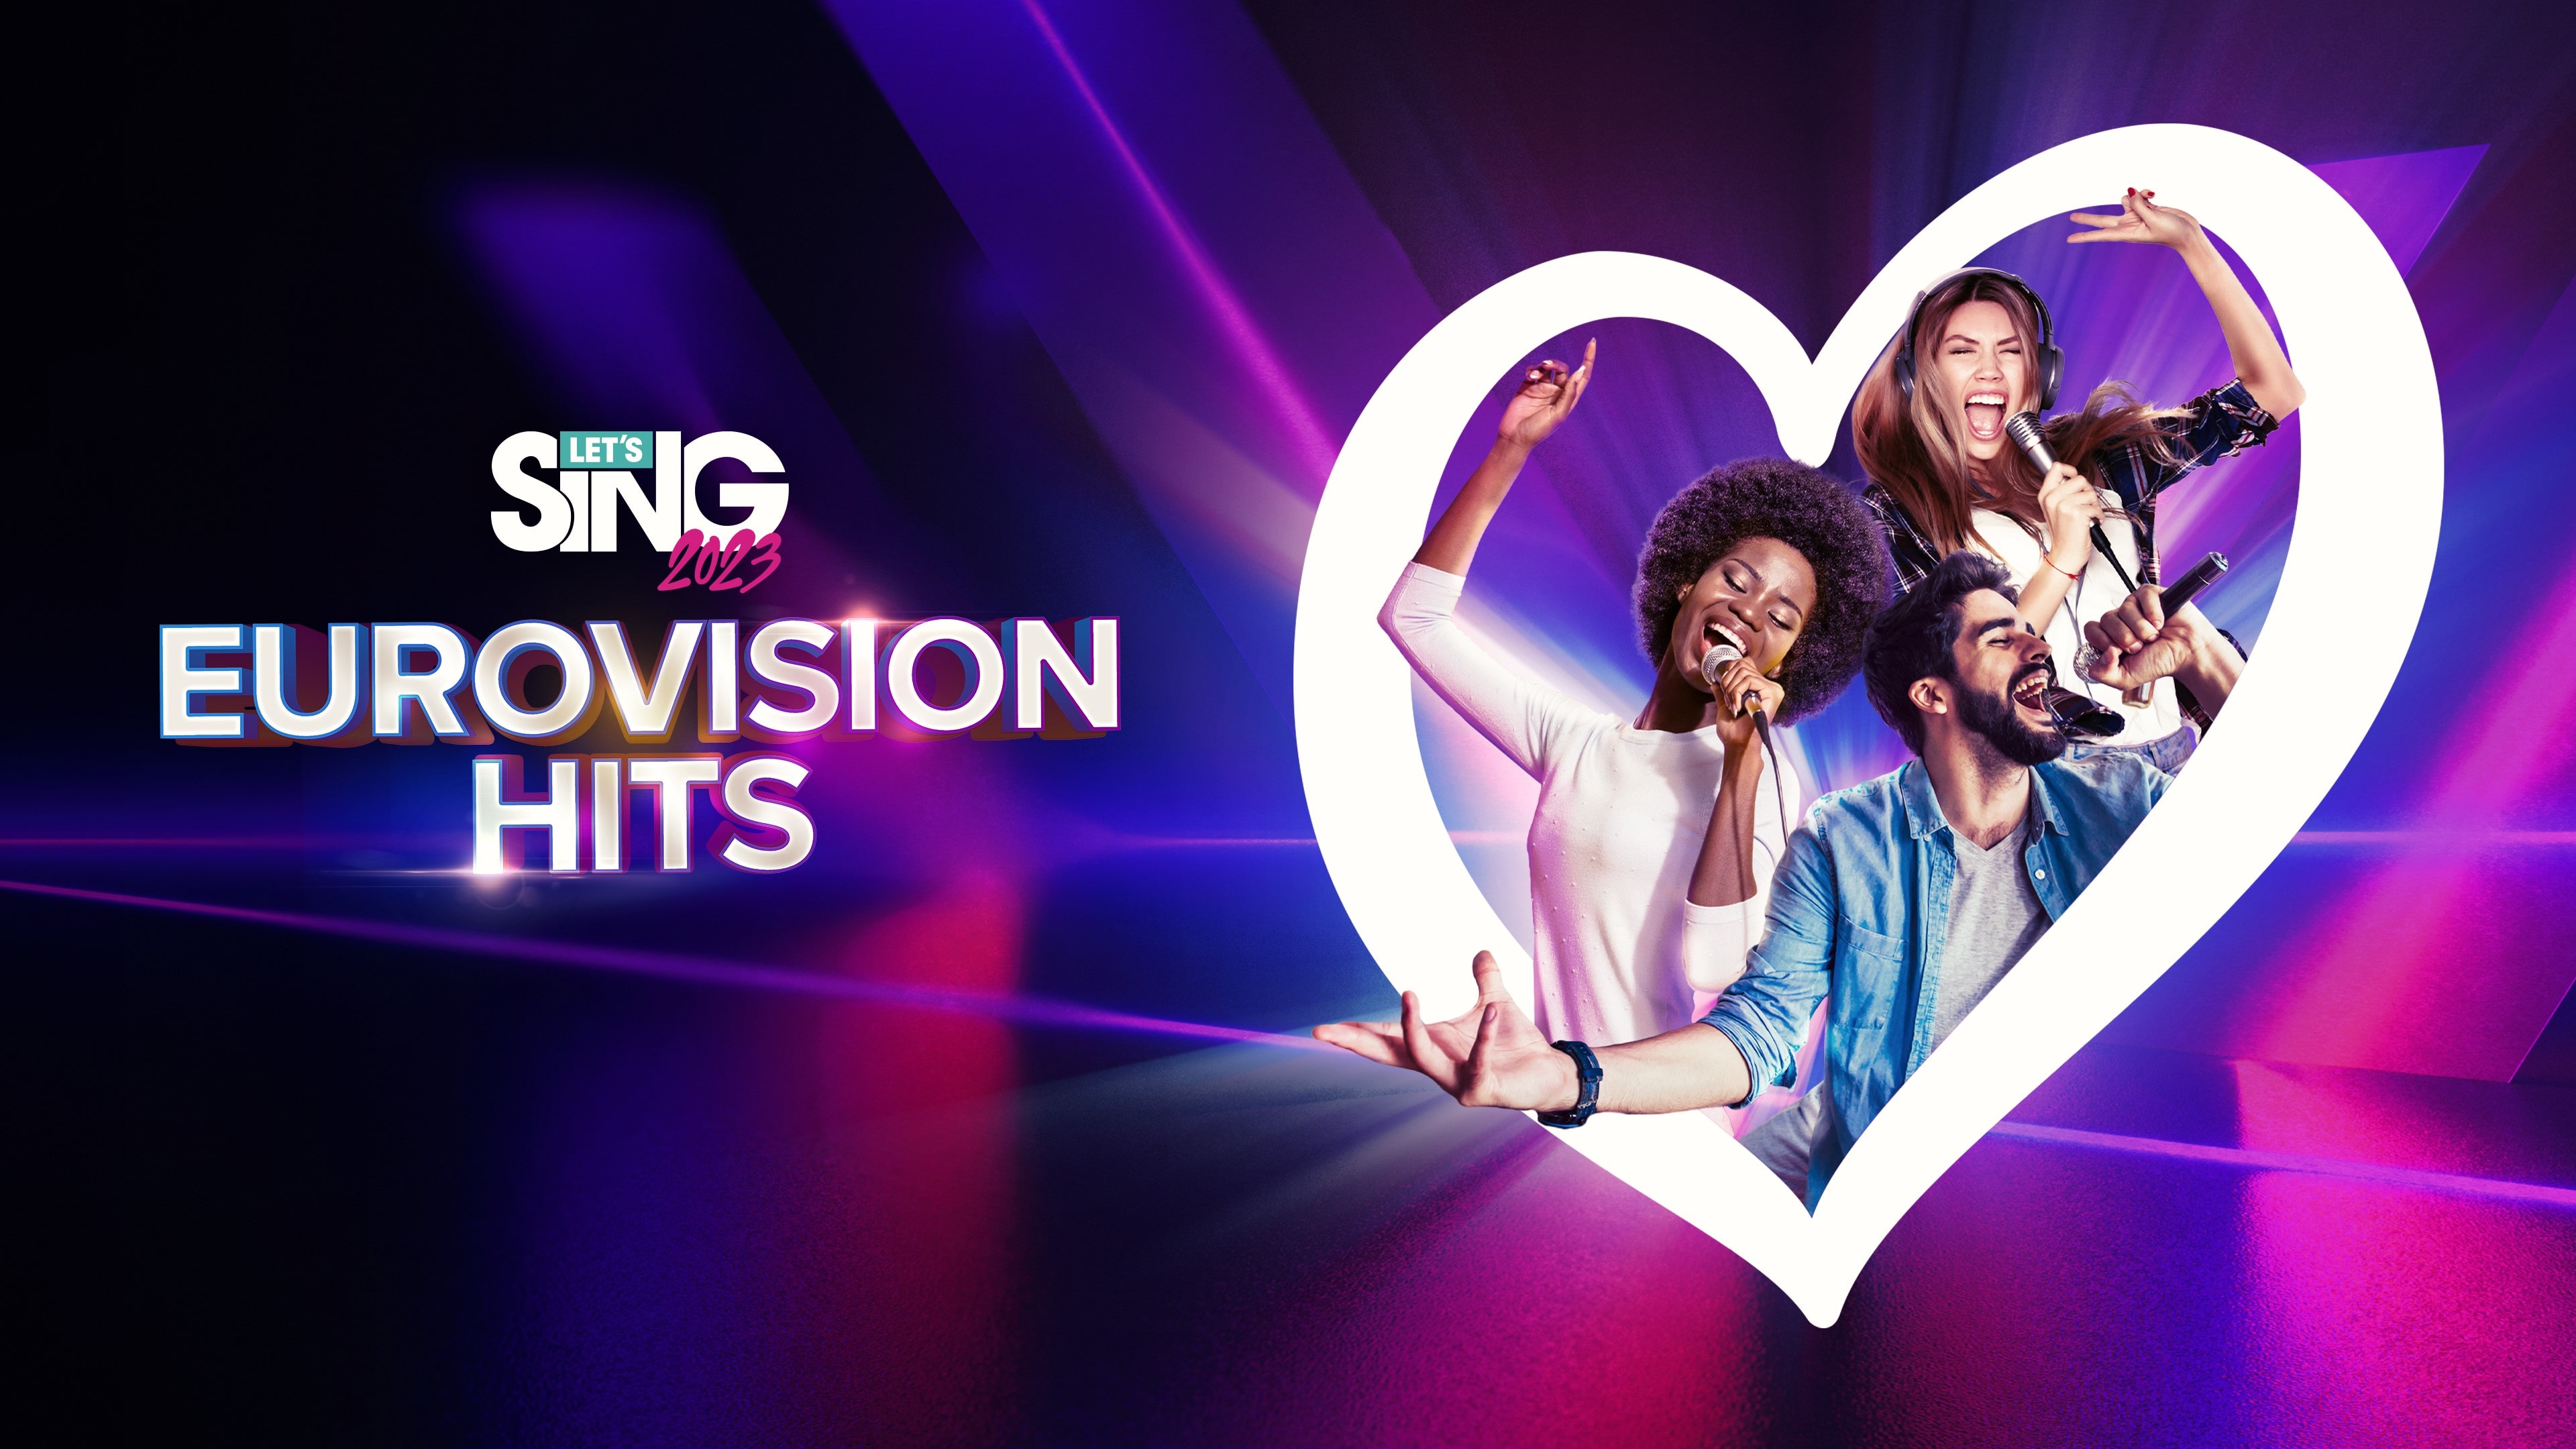 Let's Sing 2023 - Eurovision Hits Song Pack